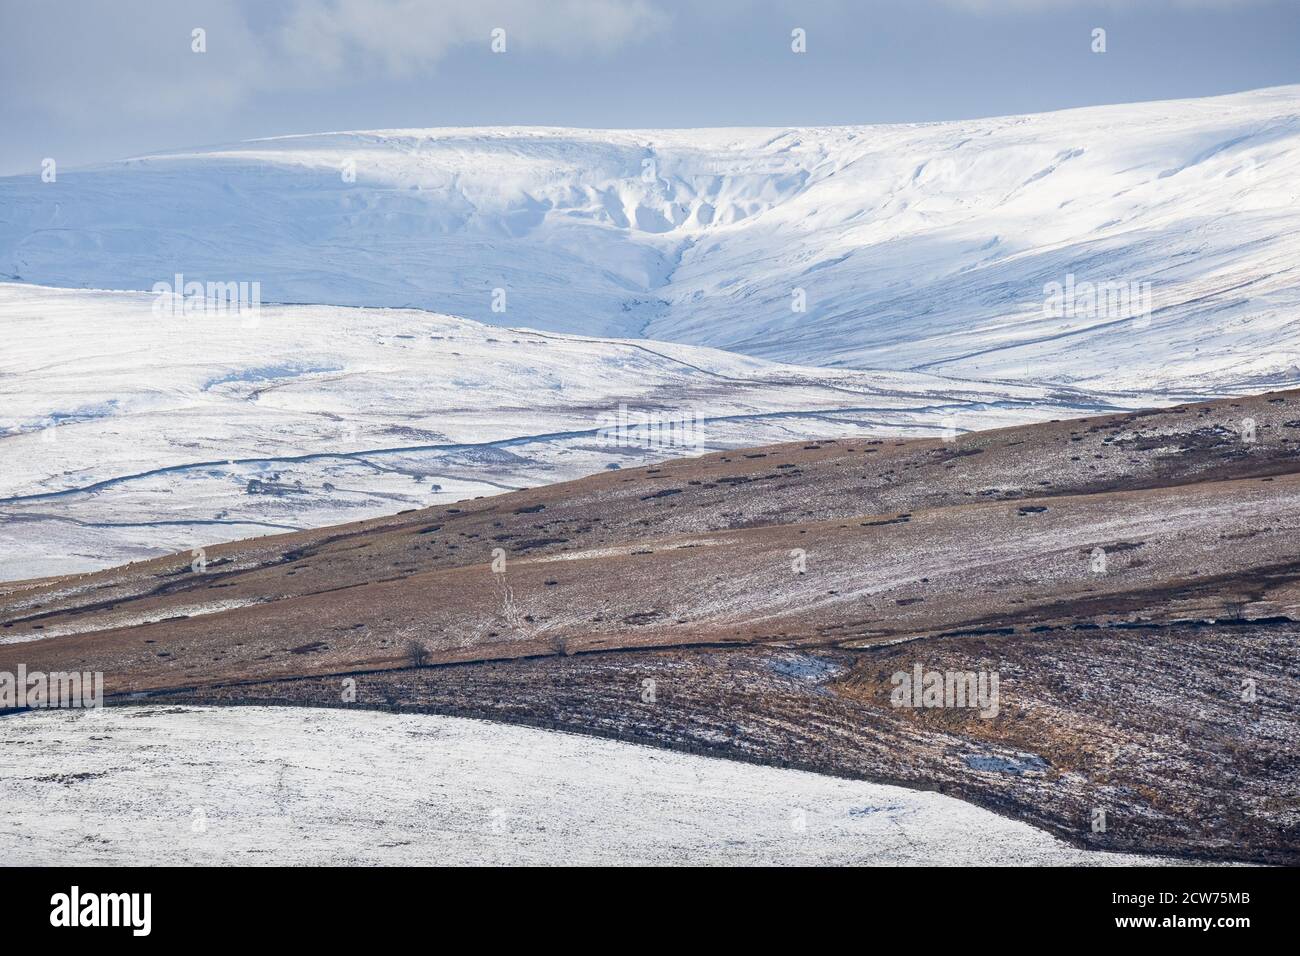 Snow on hills in the Northern Pennines above bleak deserted moors in winter. Stock Photo